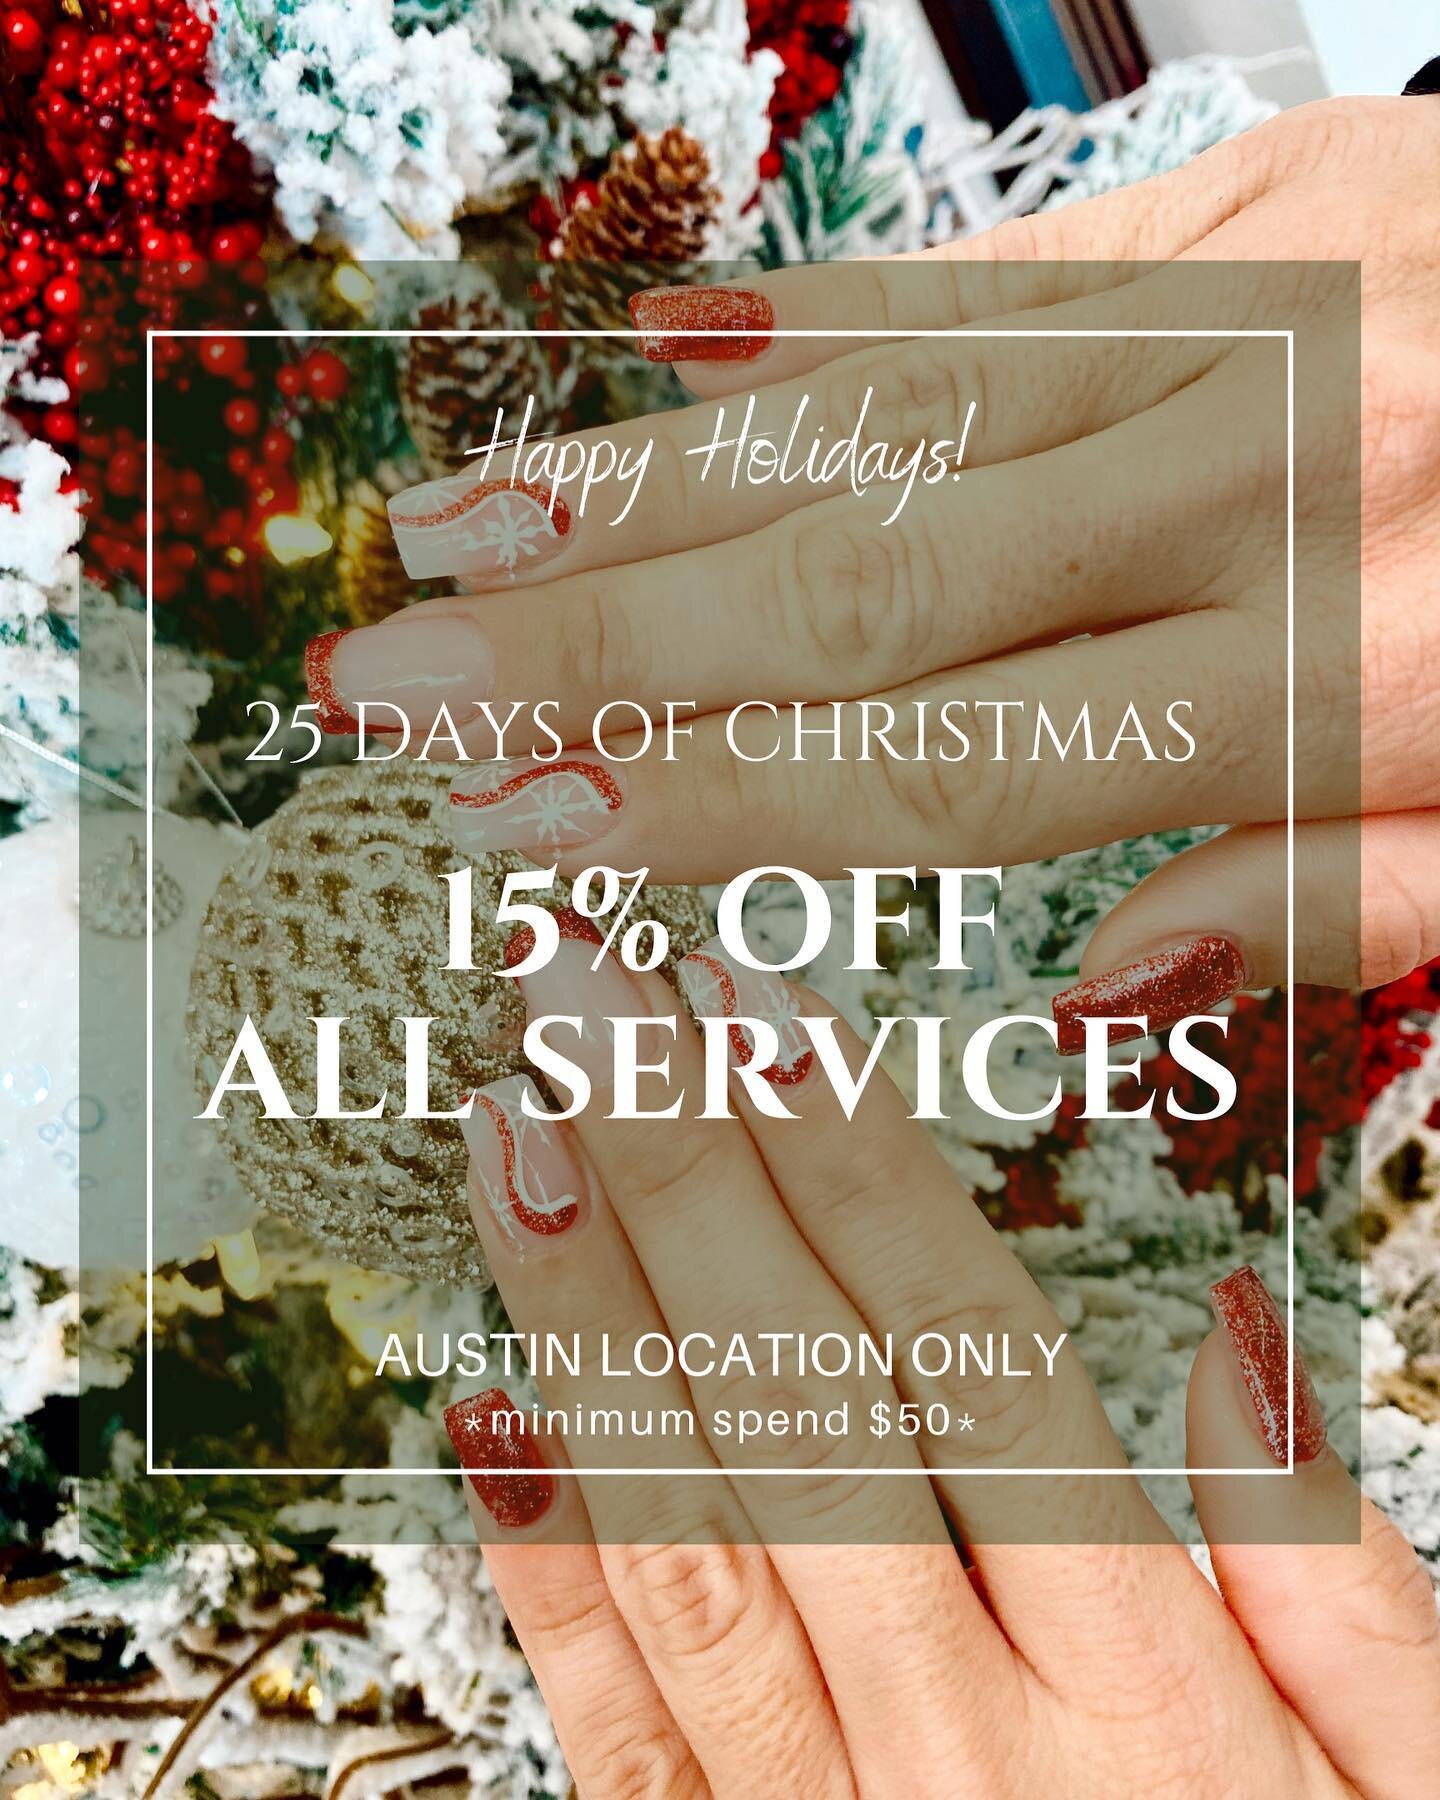 ✨🎁25 DAYS OF XMAS SPECIAL🎁✨

To make your holiday season even better and brighter, we are giving 15% off all services everyday for the next 25 days until Christmas 🎄

🎁 Promo applicable at Austin location ONLY
🎁 Minimum spend $50
🎁 Special ends